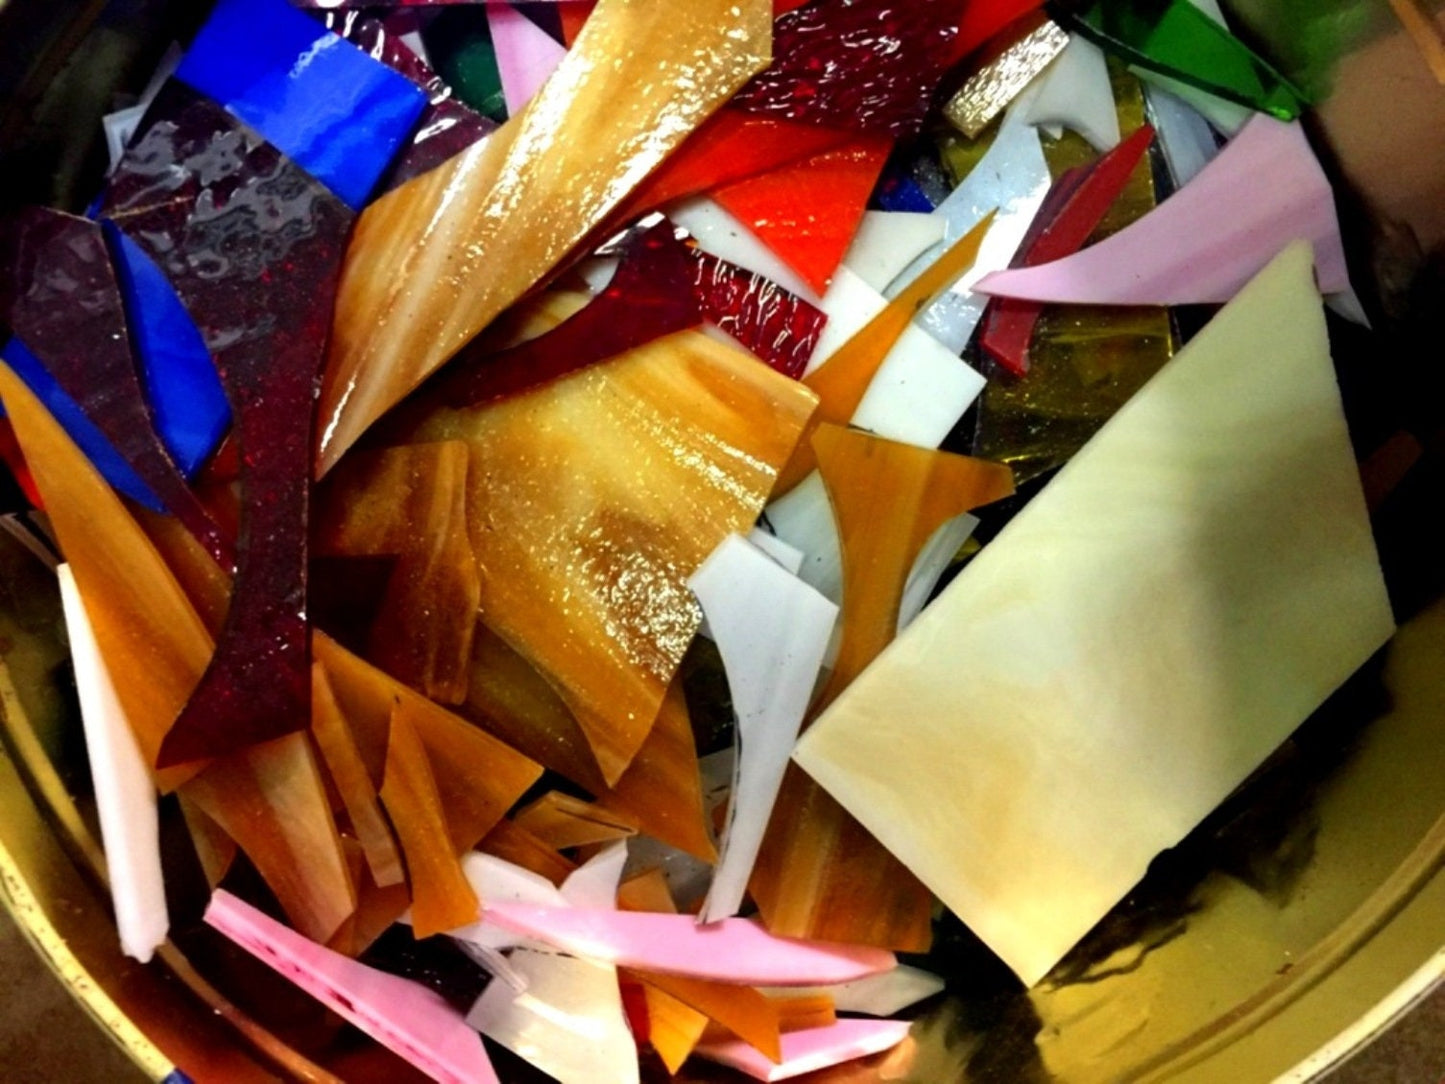 1 lb. Grab Bag of Stained Glass Scrap Pieces Assorted Colors